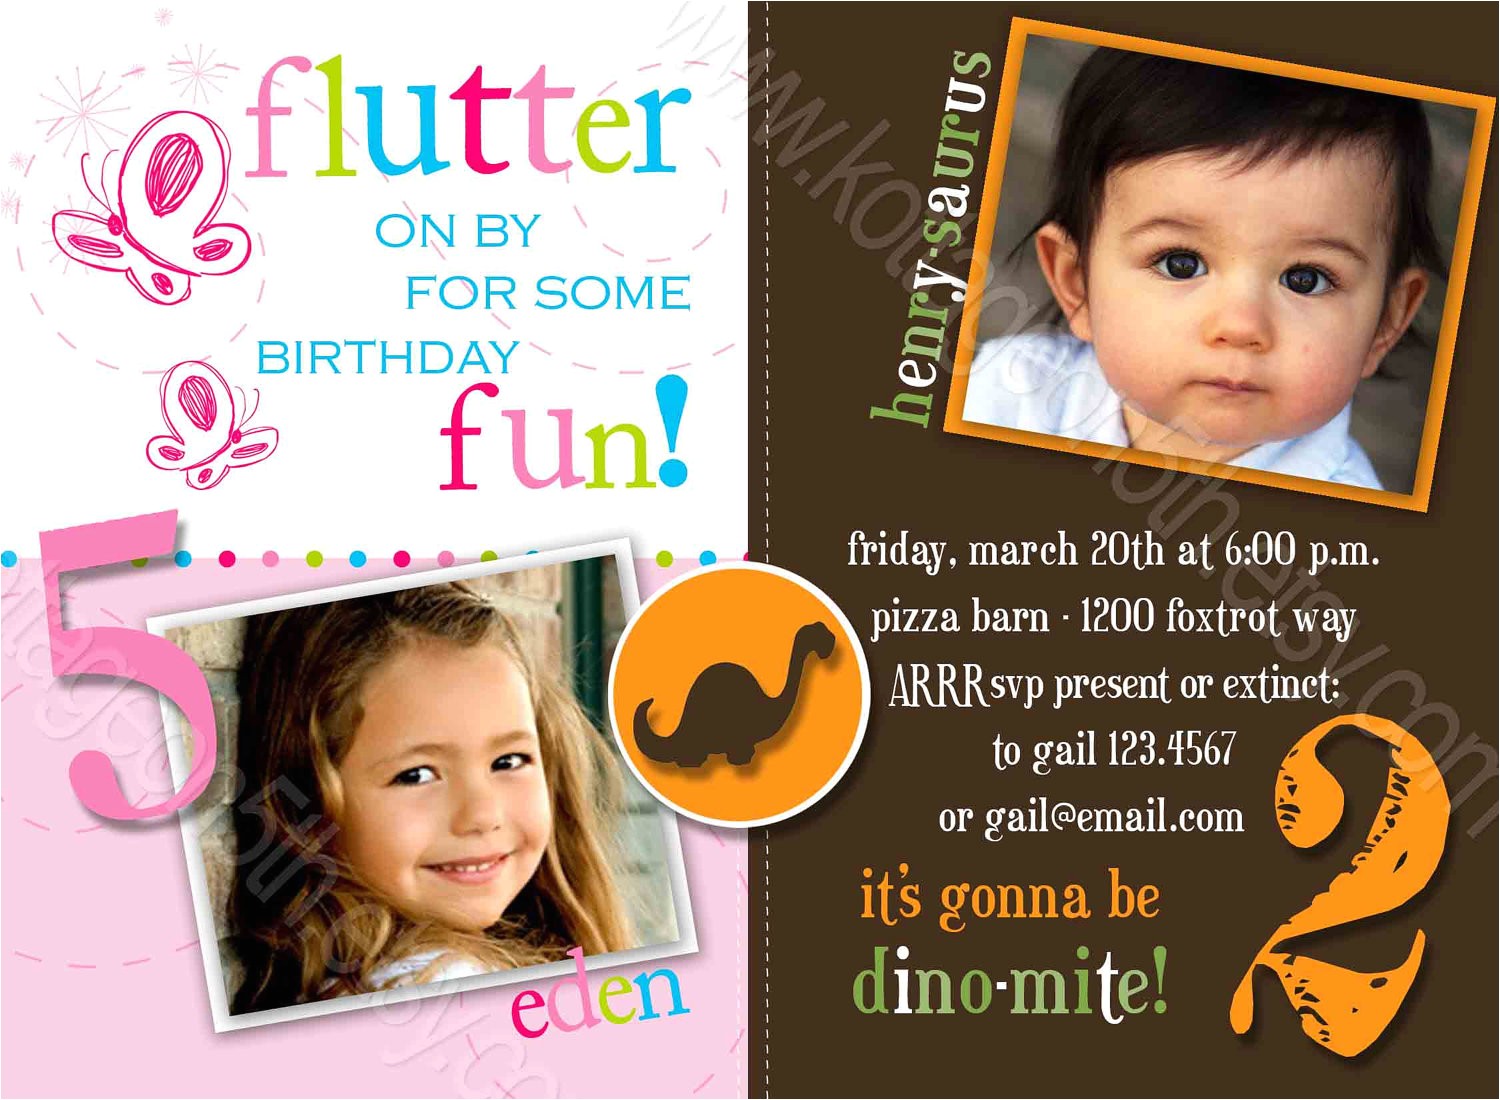 joint birthday party invitations